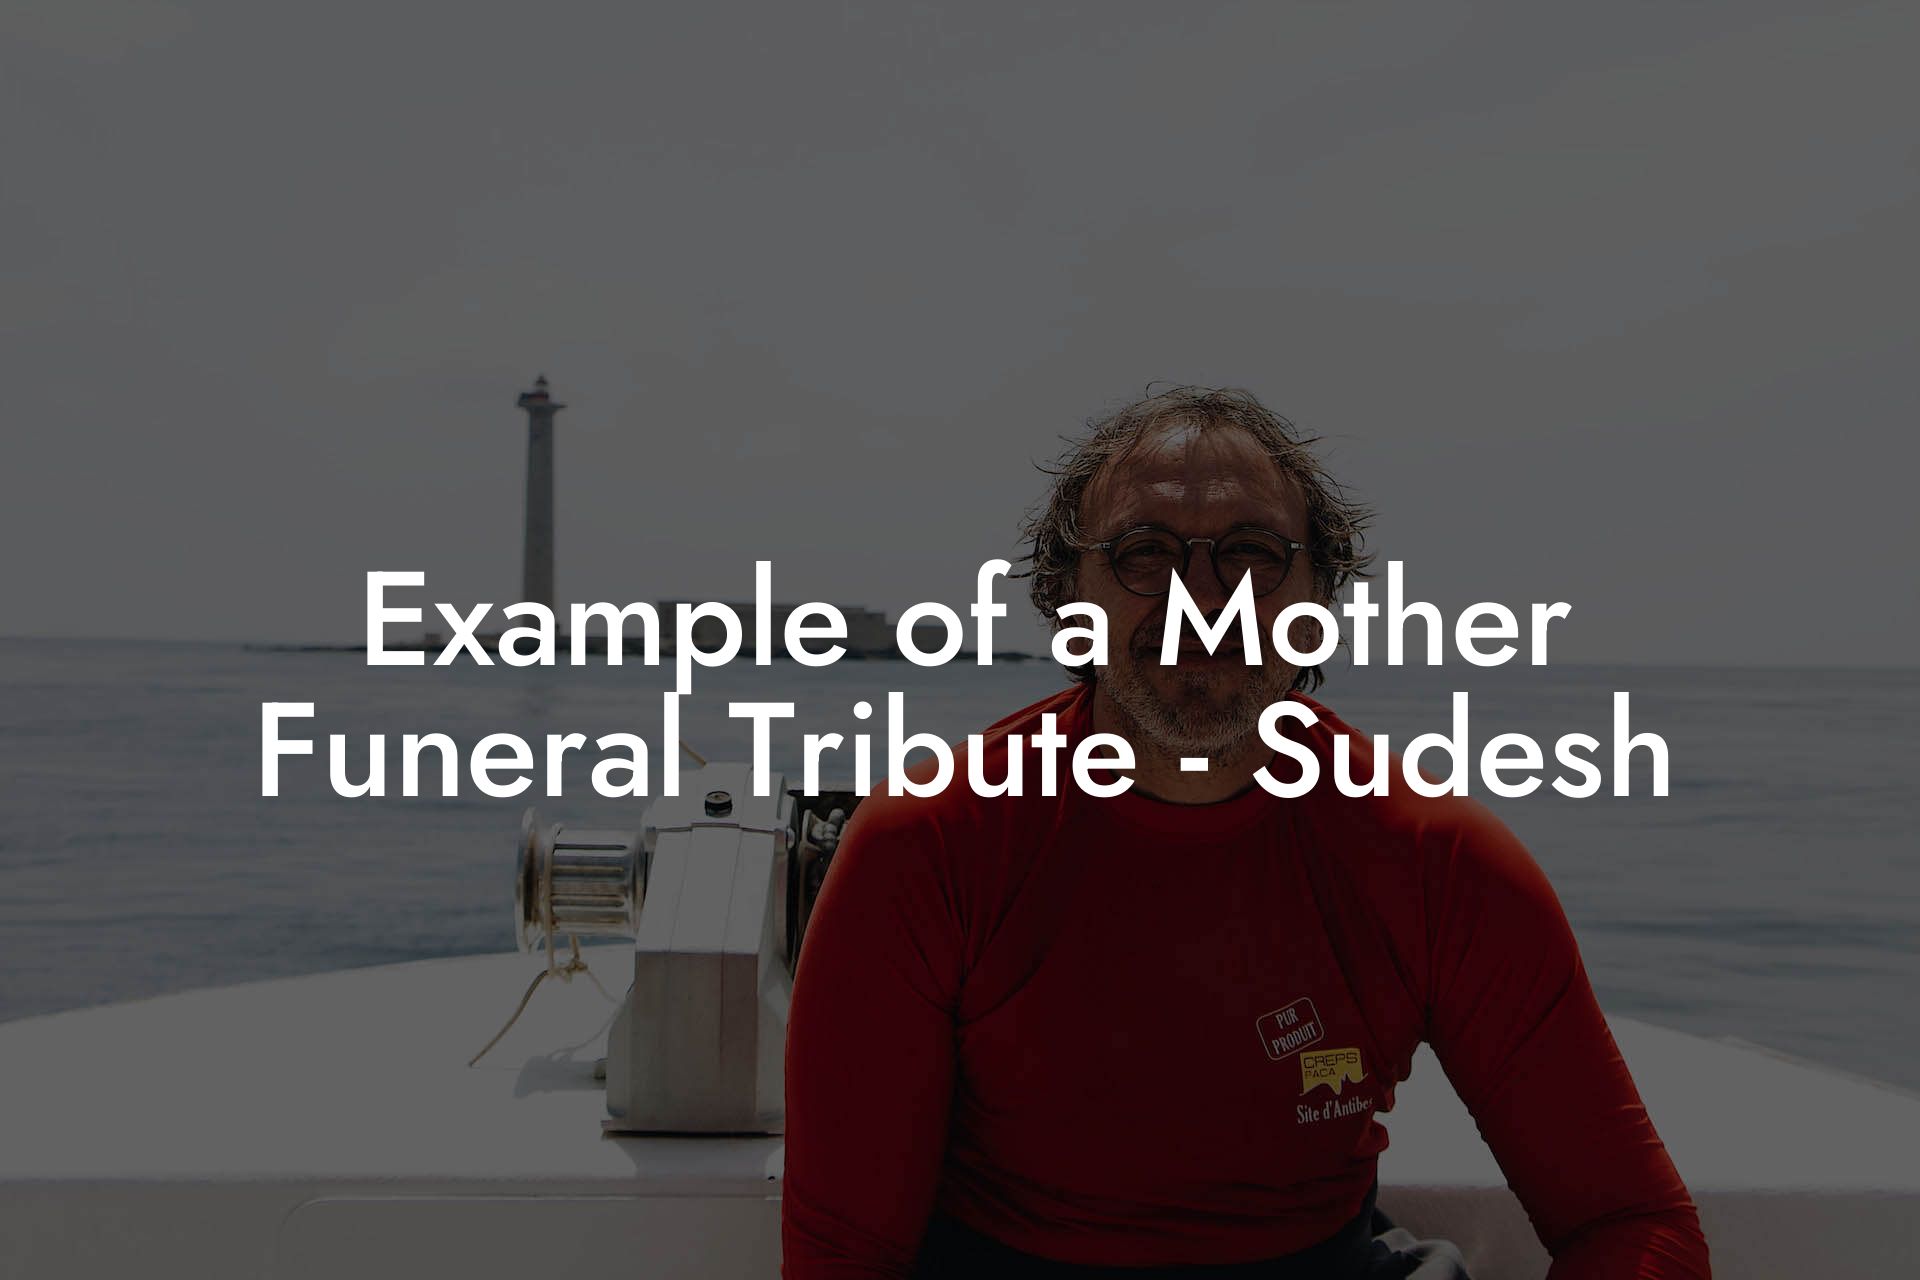 Example of a Mother Funeral Tribute - Sudesh